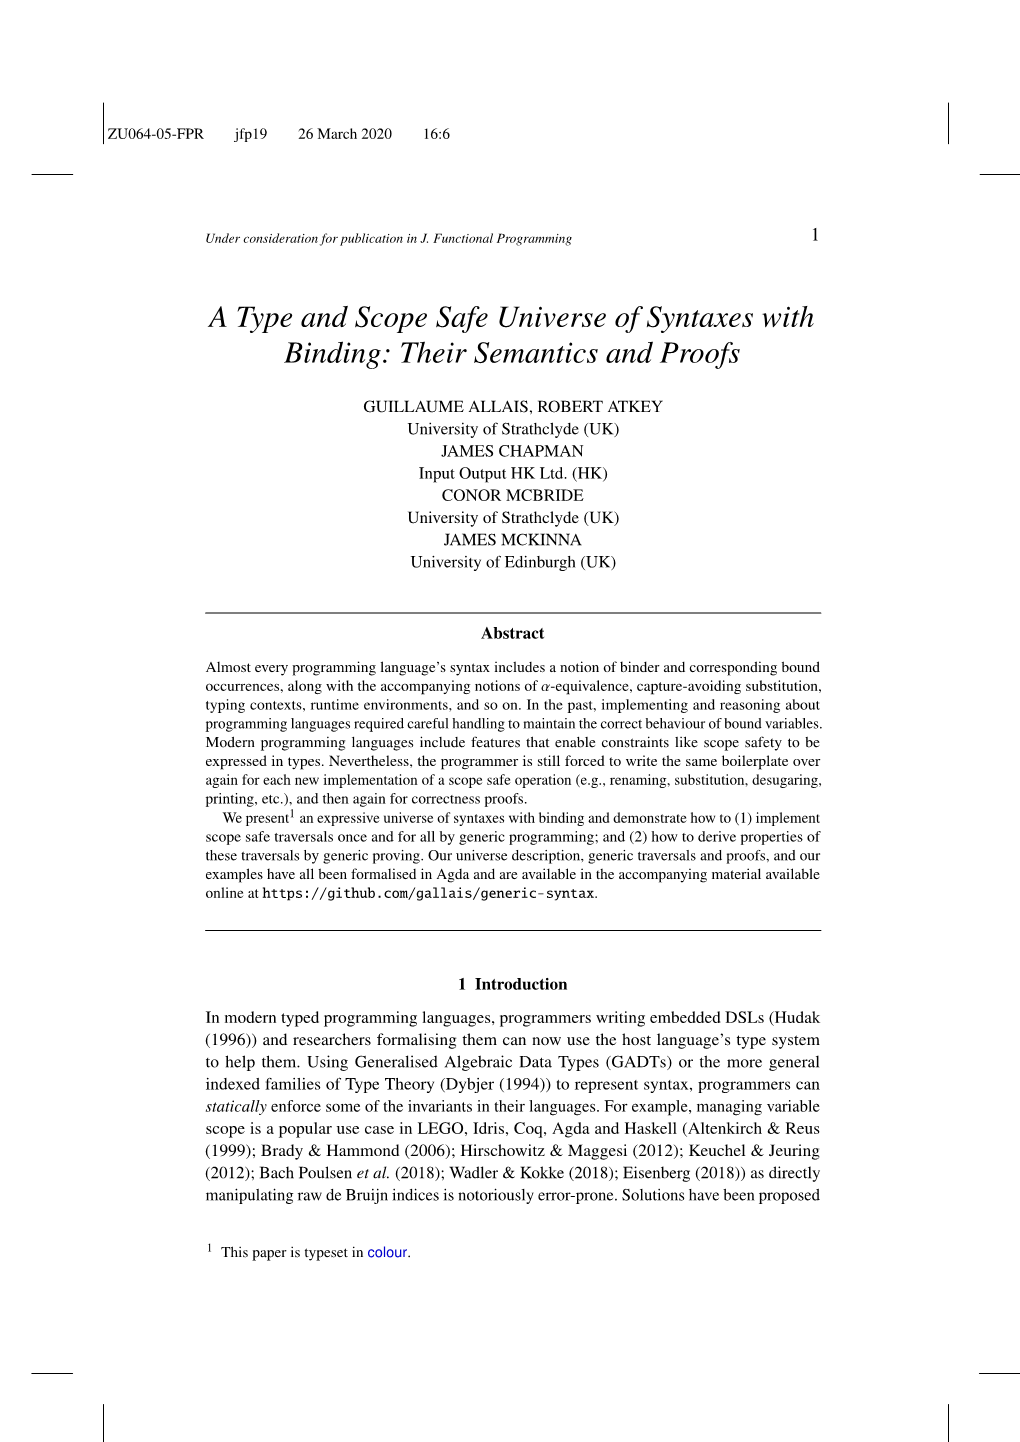 A Type and Scope Safe Universe of Syntaxes with Binding: Their Semantics and Proofs